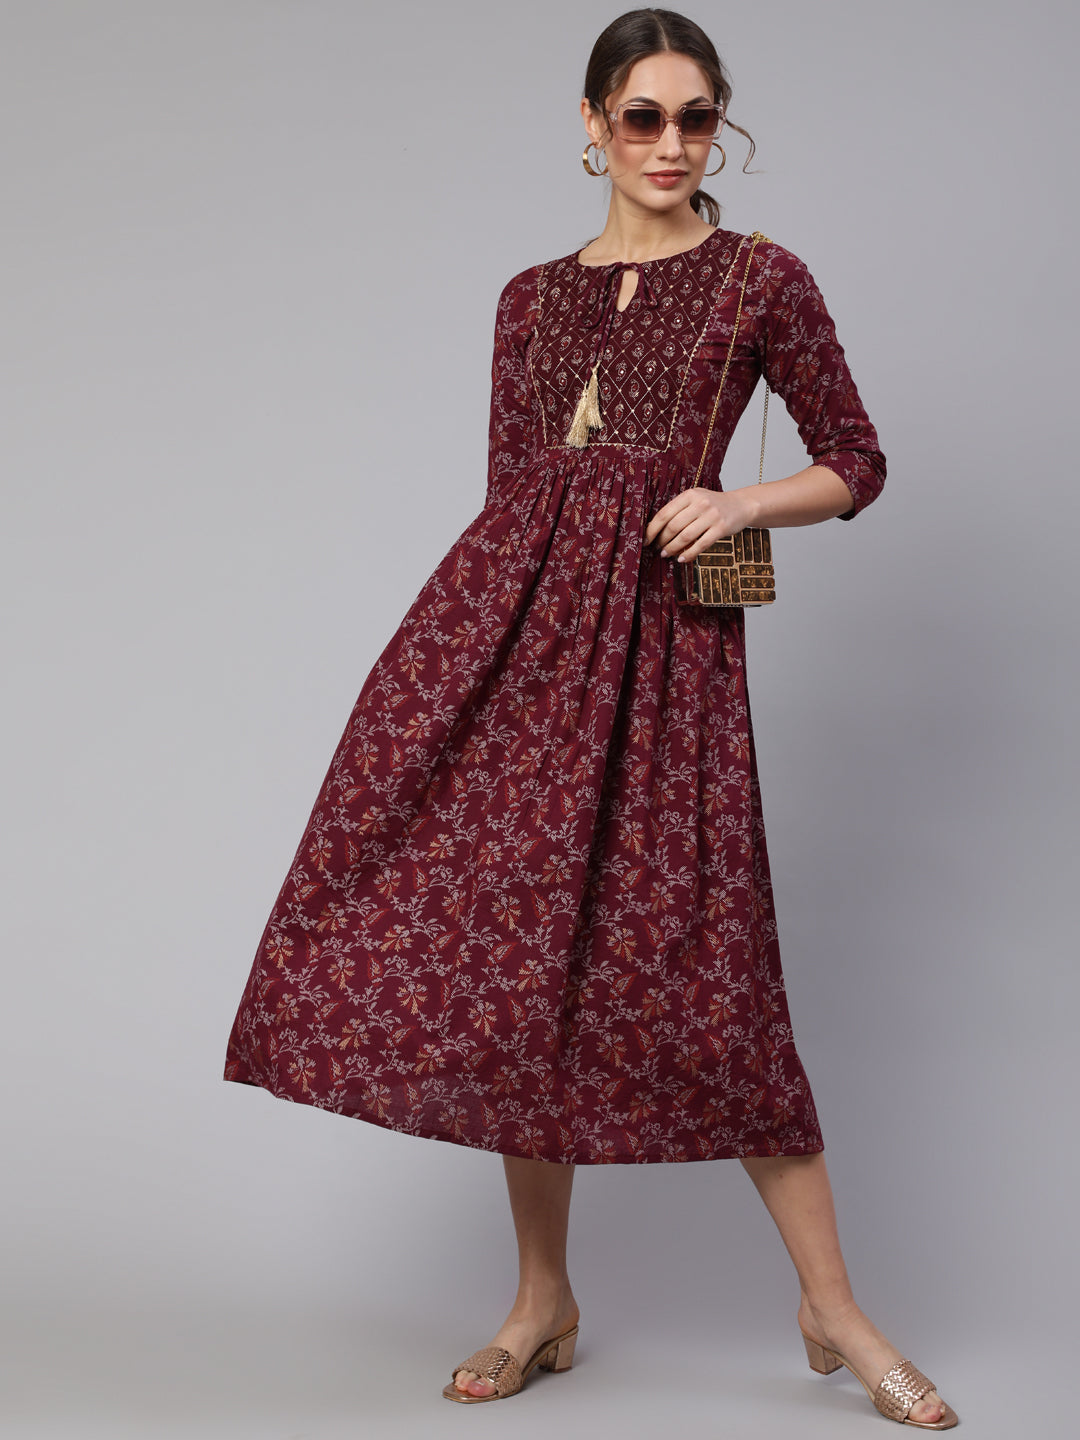 Women's Wome Burgundy Printed Flared Dress With Three quarter Sleeves - Nayo Clothing